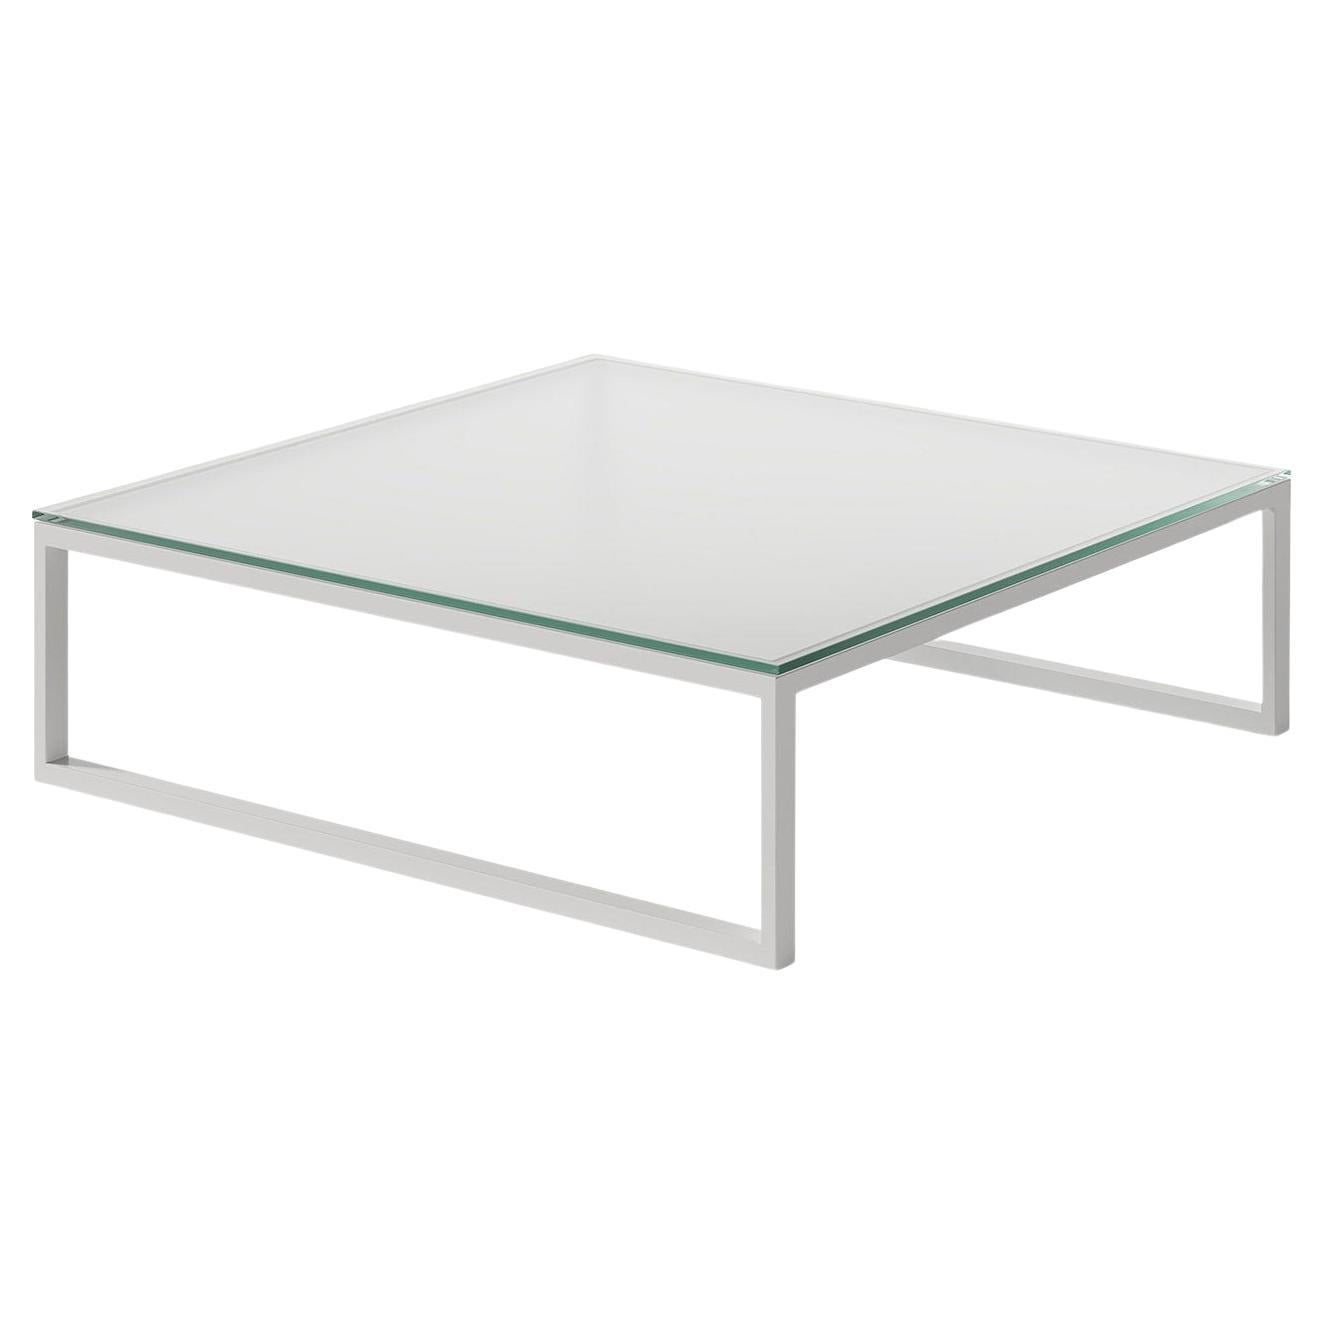 Metropolitan Square White Coffee Table by Carlo Colombo #1 For Sale